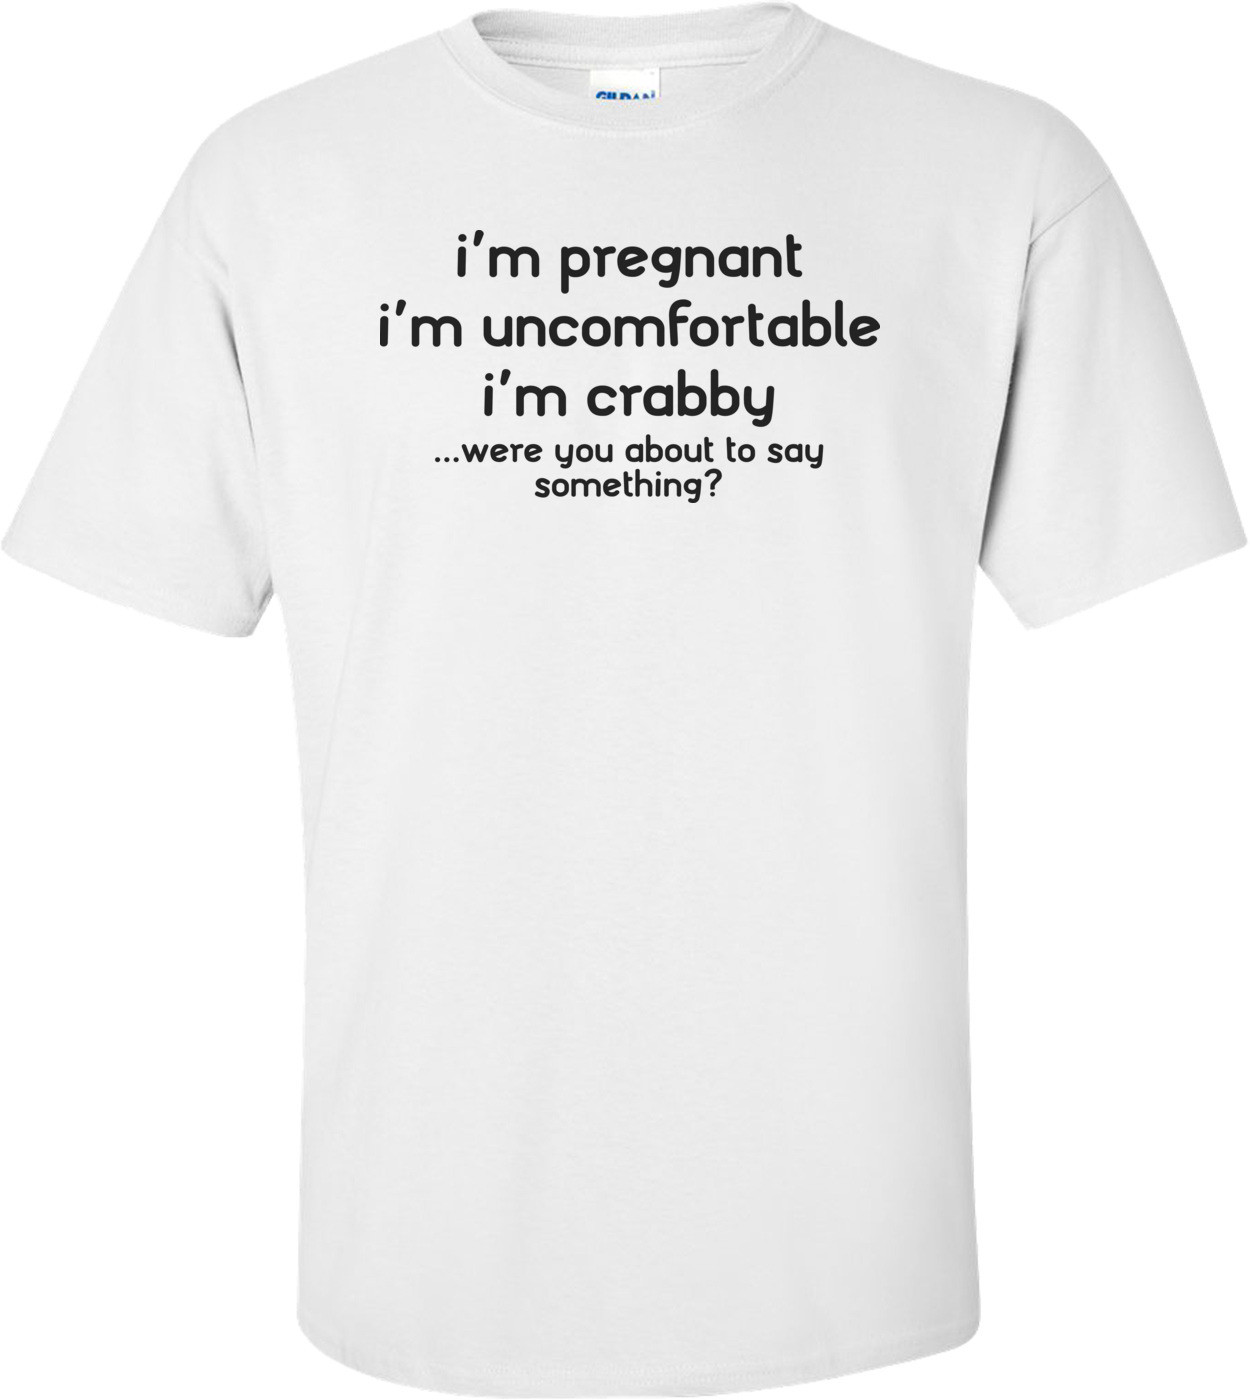 I'm Pregnant, Uncomfortable And Crabby, Were You About To Say Something?  Funny Pregnancy